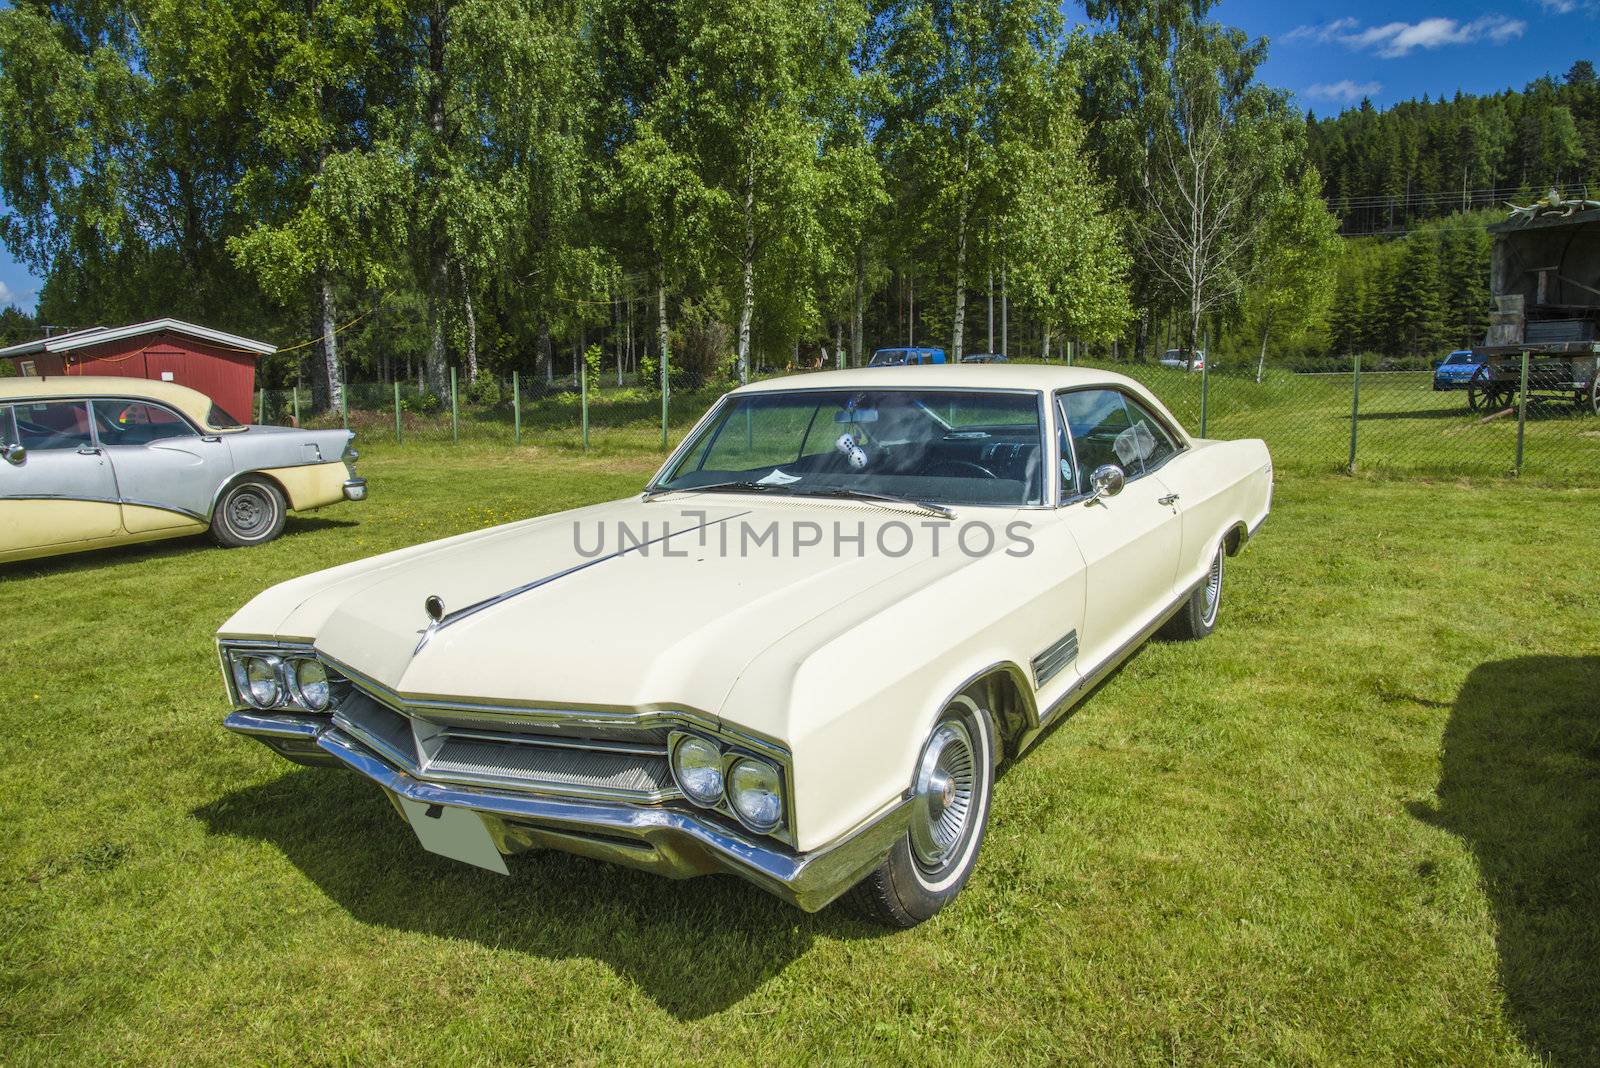 Classic Amcar, 1966 Buick Wildcat. The image is shot by Dawn at the Farm in Halden, Norway.